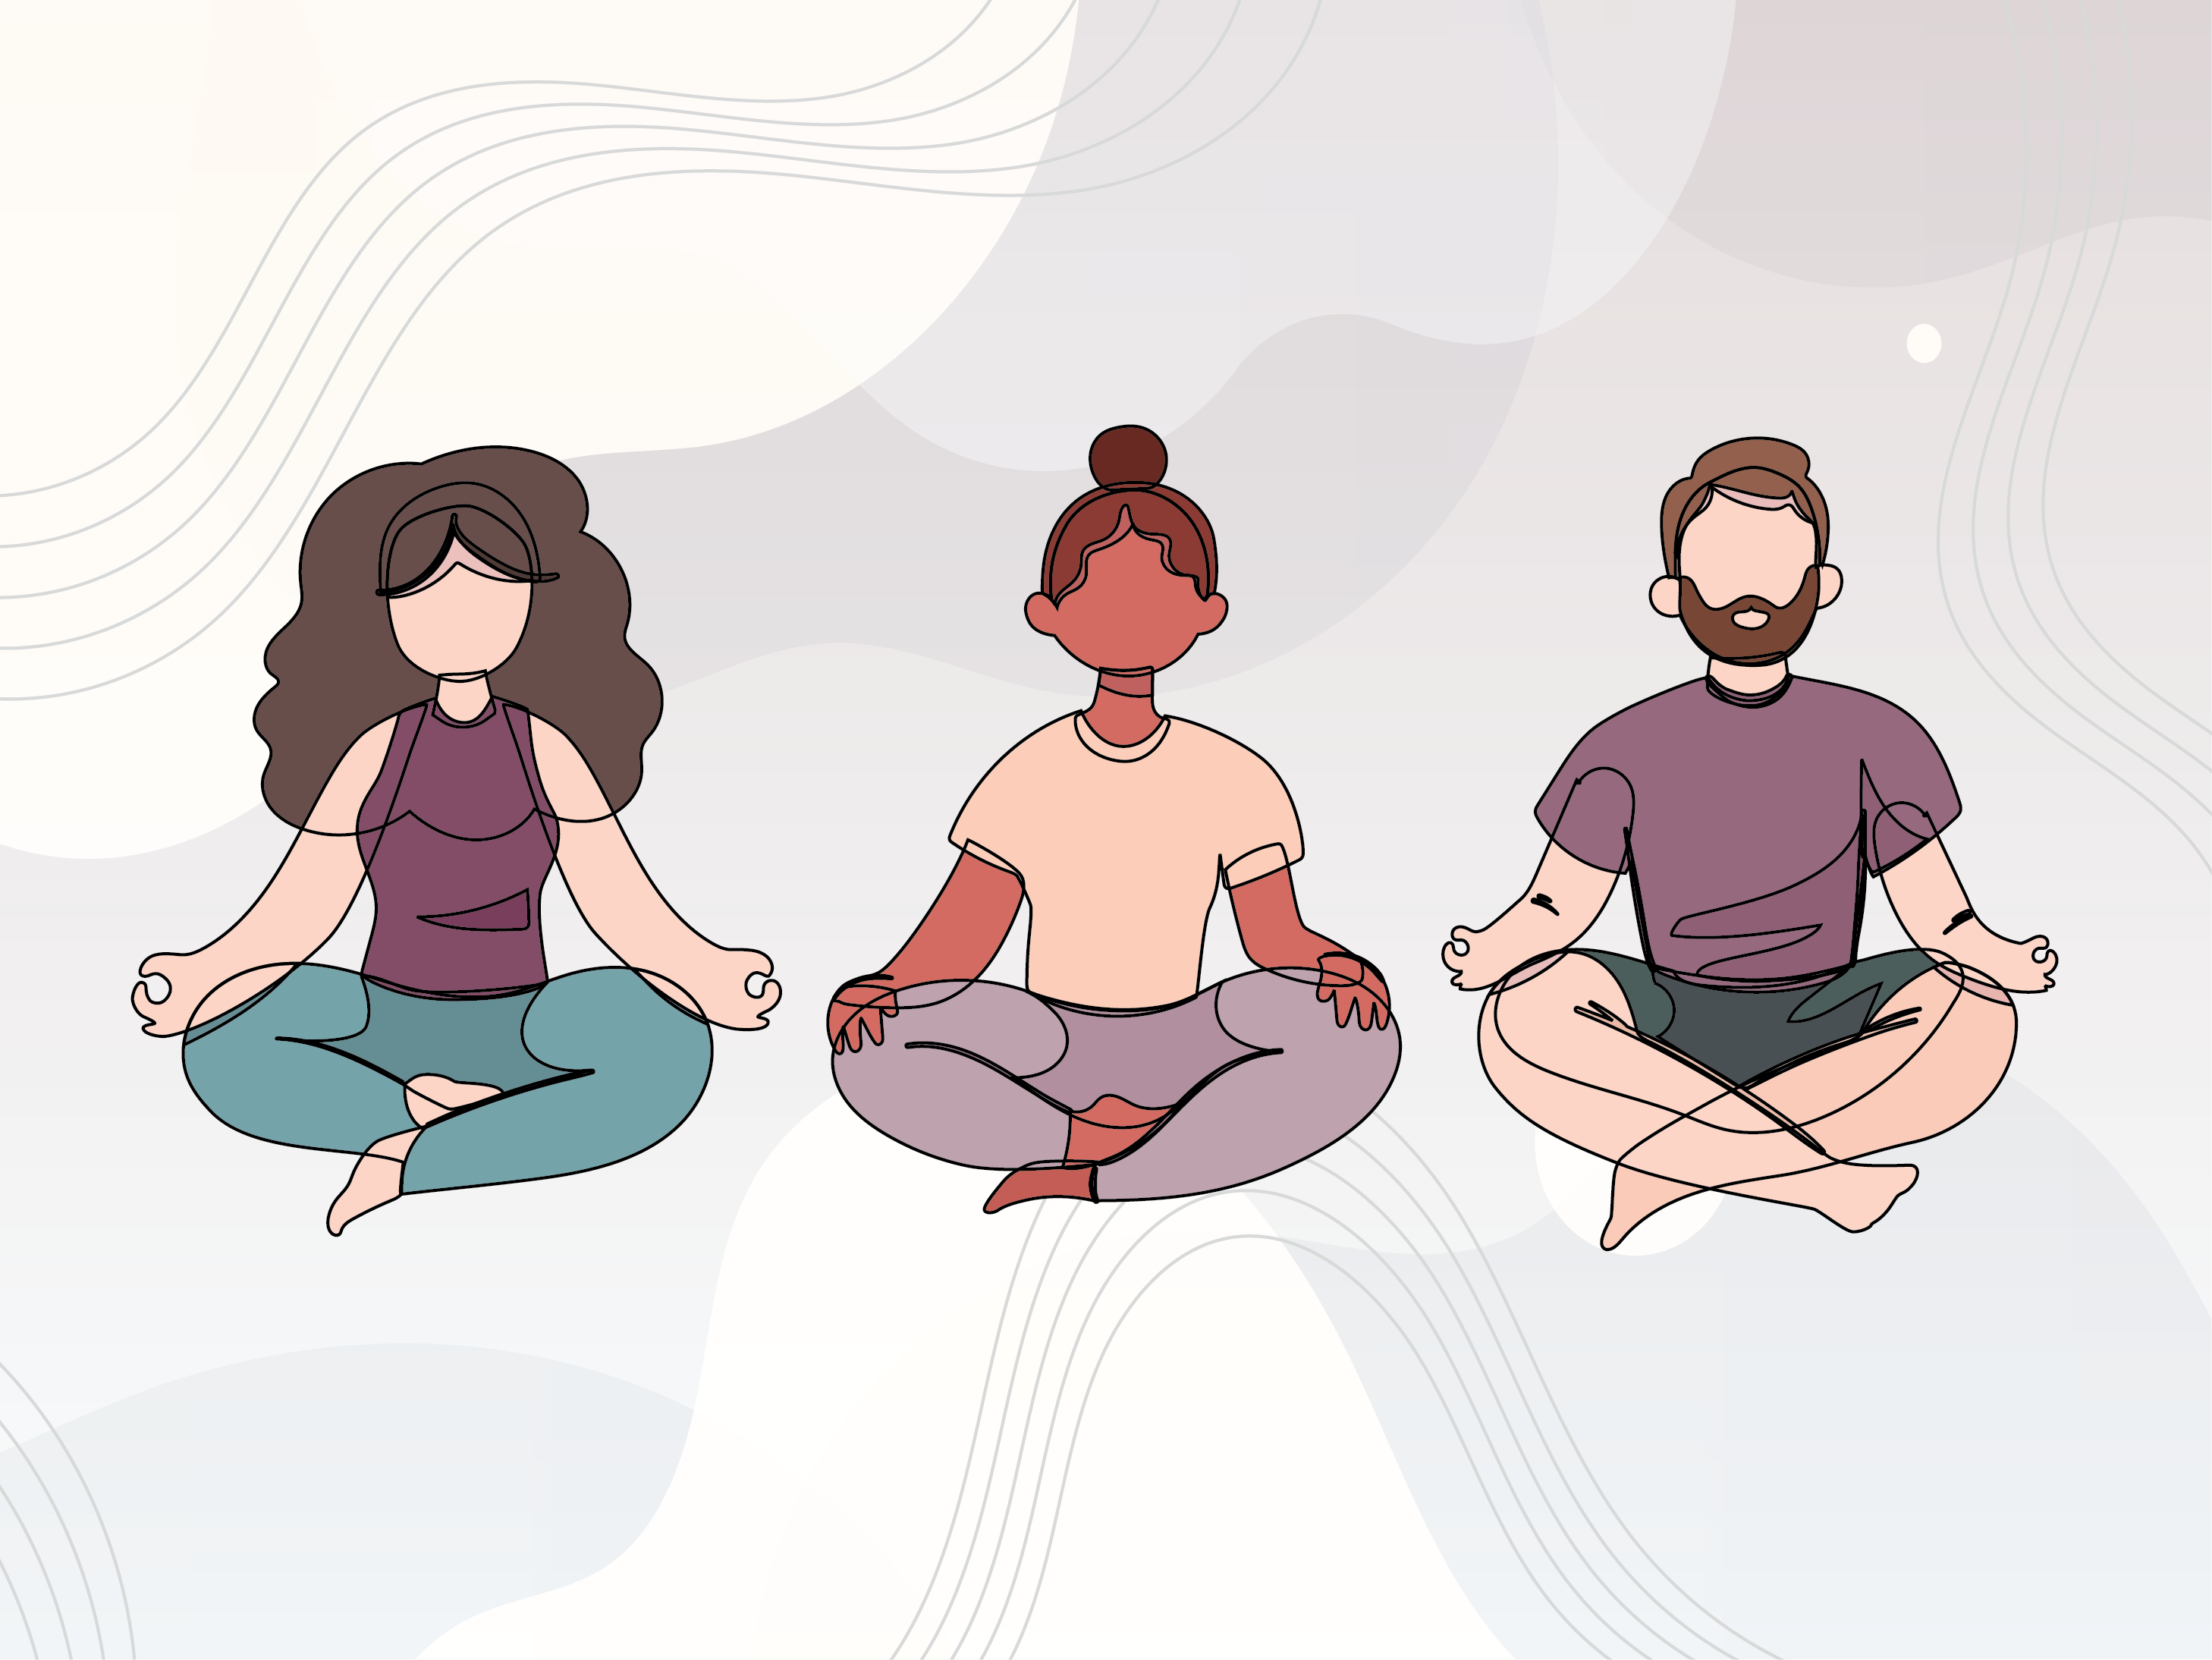 outlined graphics of three people sitting in a row doing yoga.